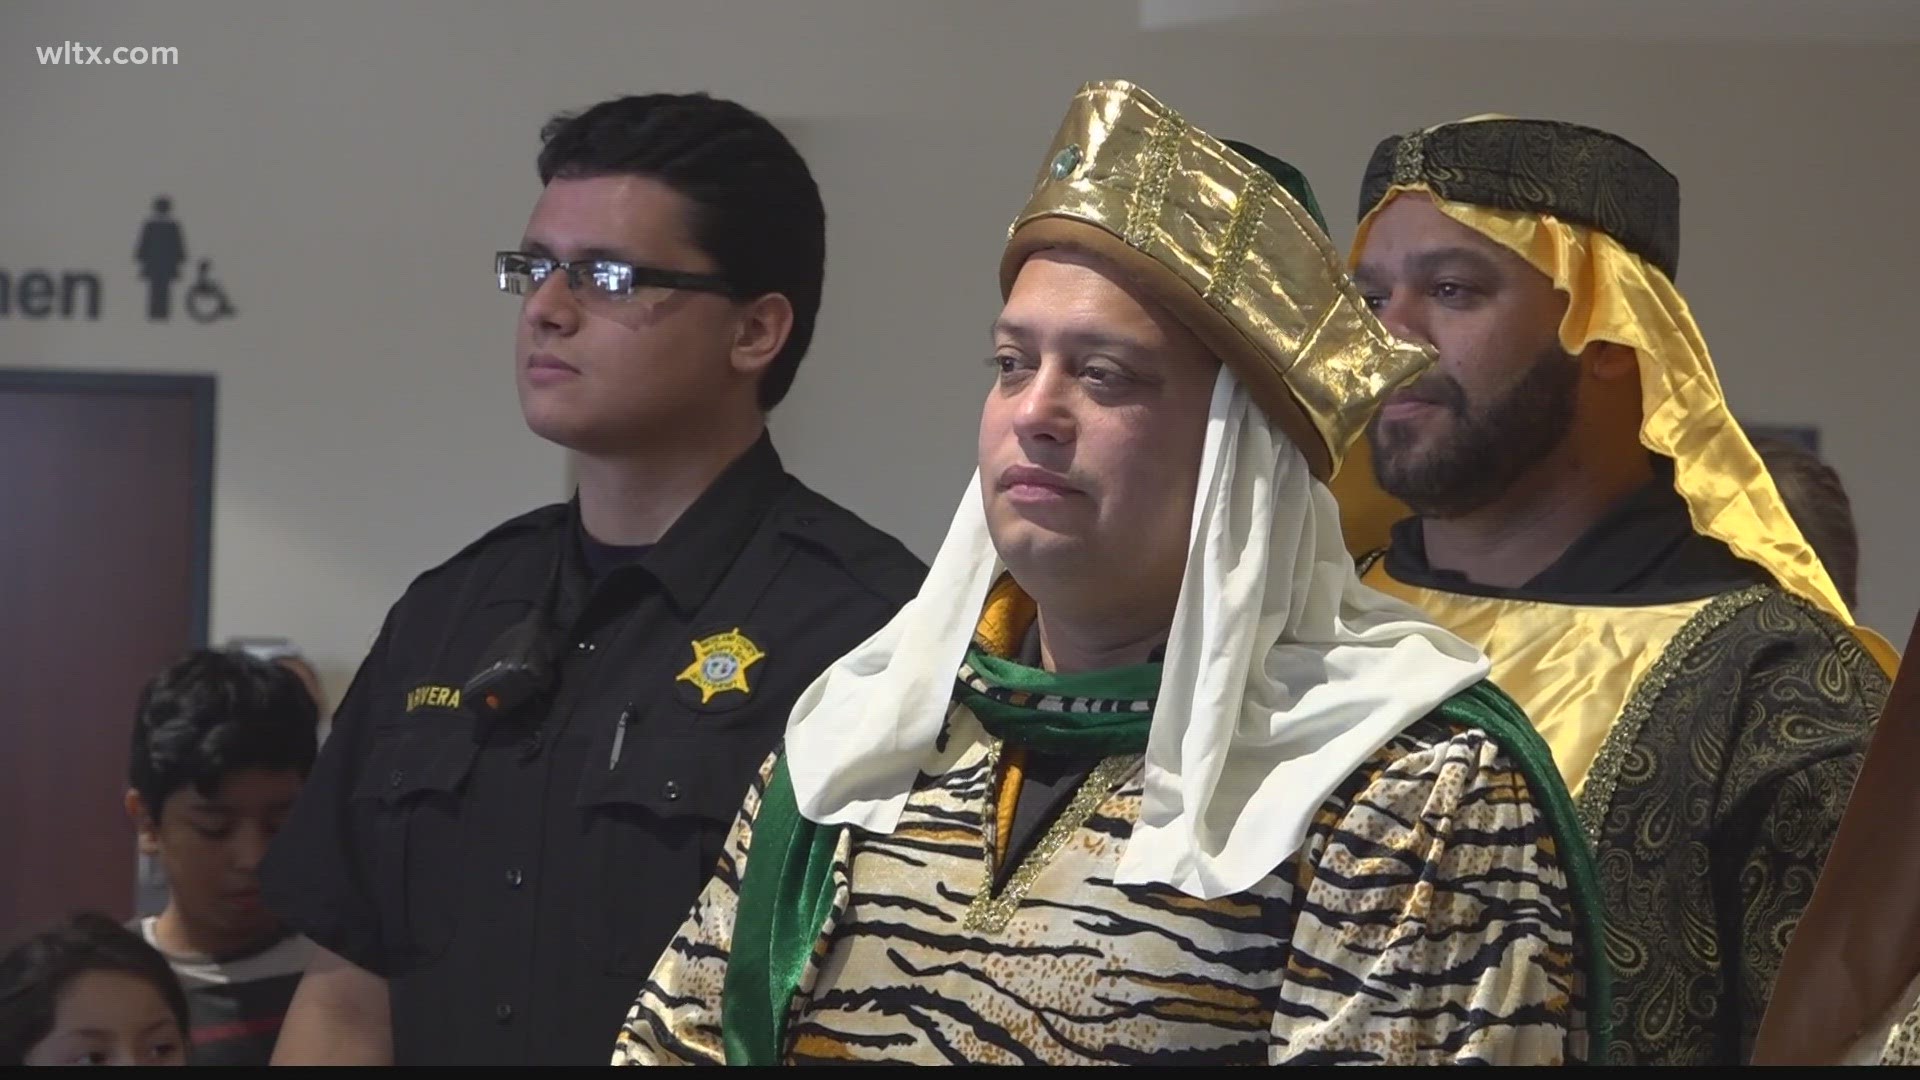 The annual Three Kings Day event in Columbia will be held Saturday on Decker Boulevard.